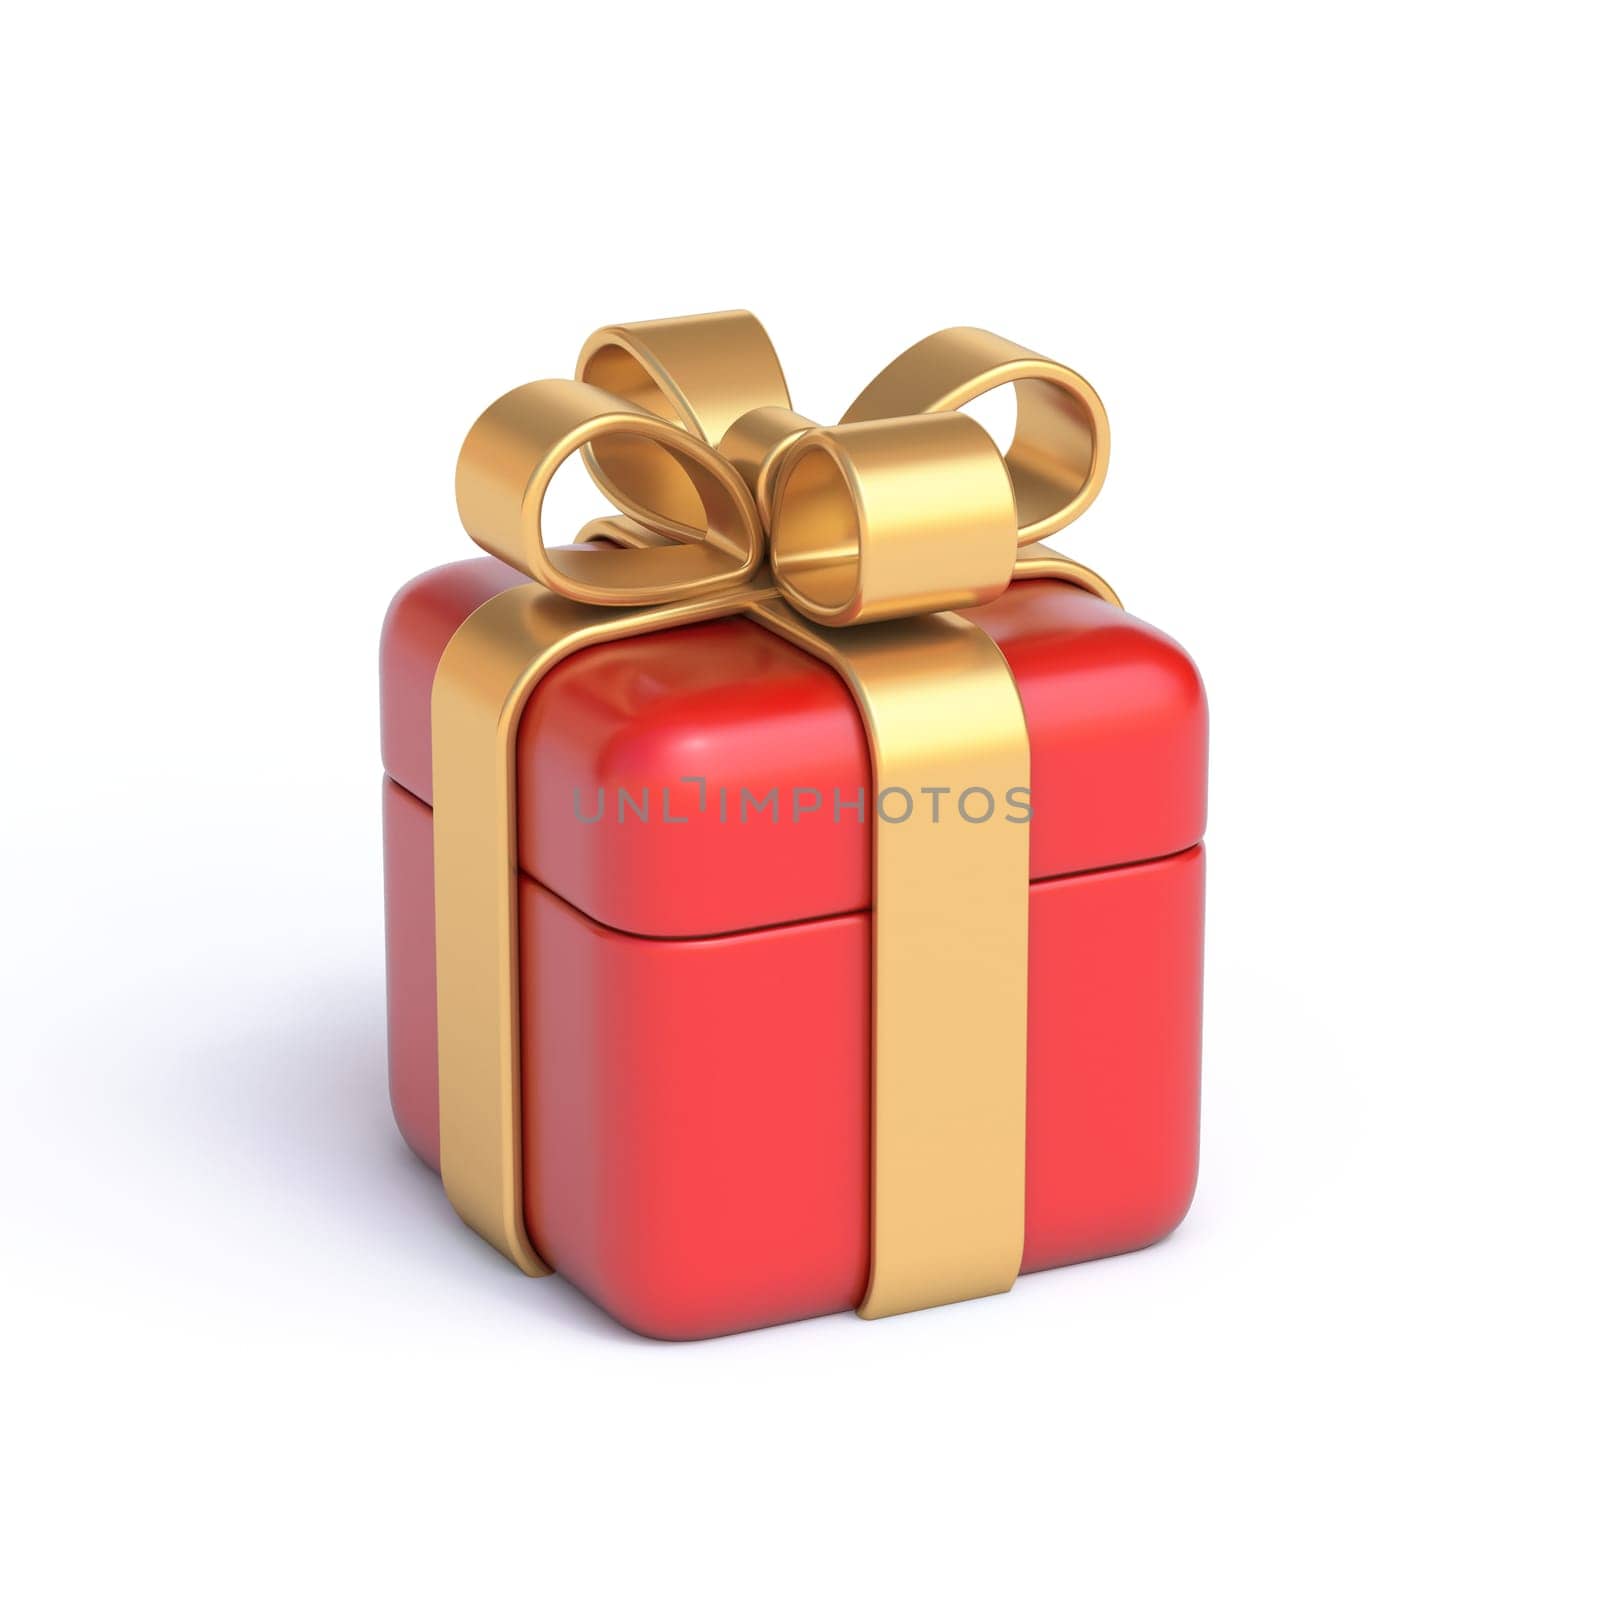 Red gift box icon Closed 3D rendering illustration isolated on white background